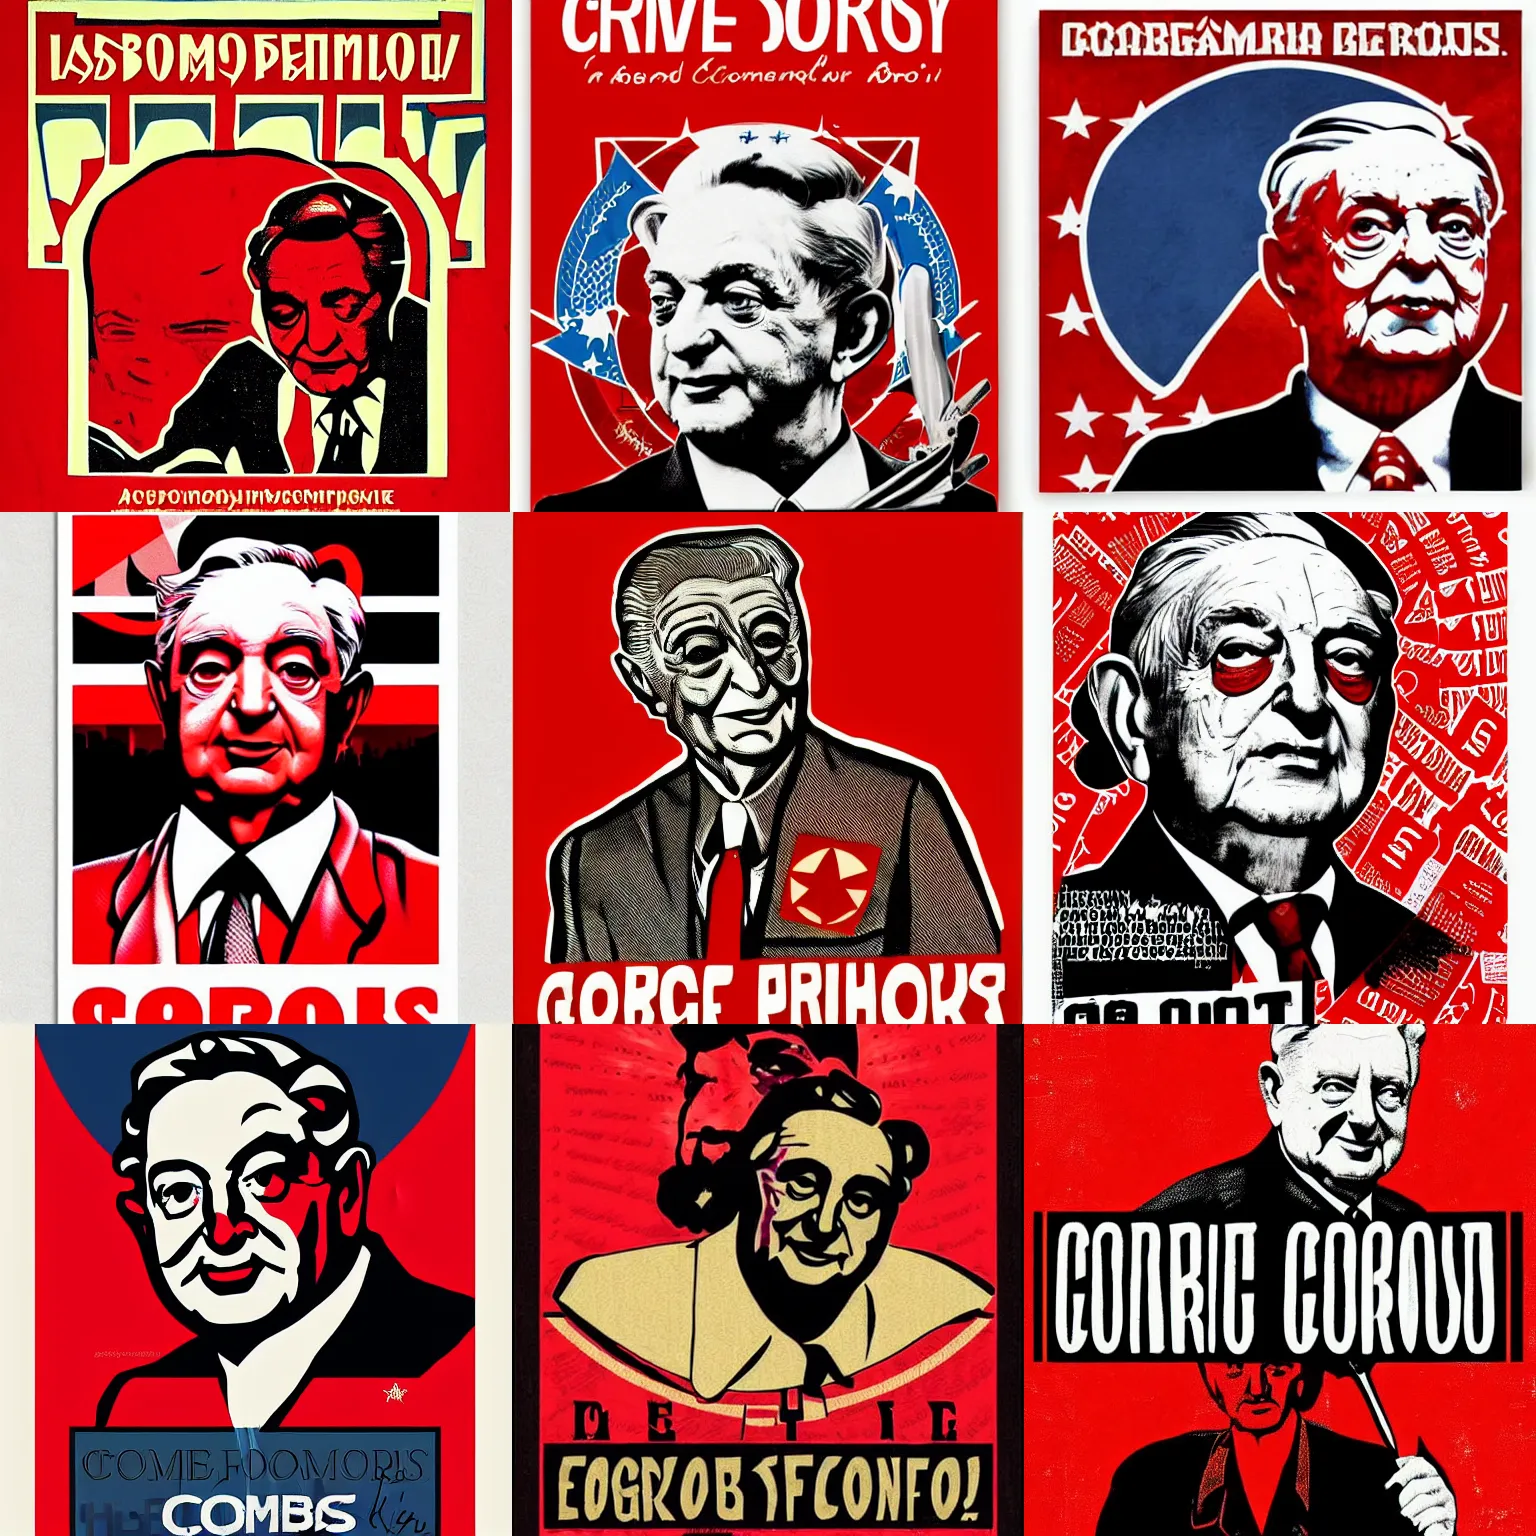 Prompt: george soros communist propaganda, high contrast, graphic design, red colors, by fairey shepard